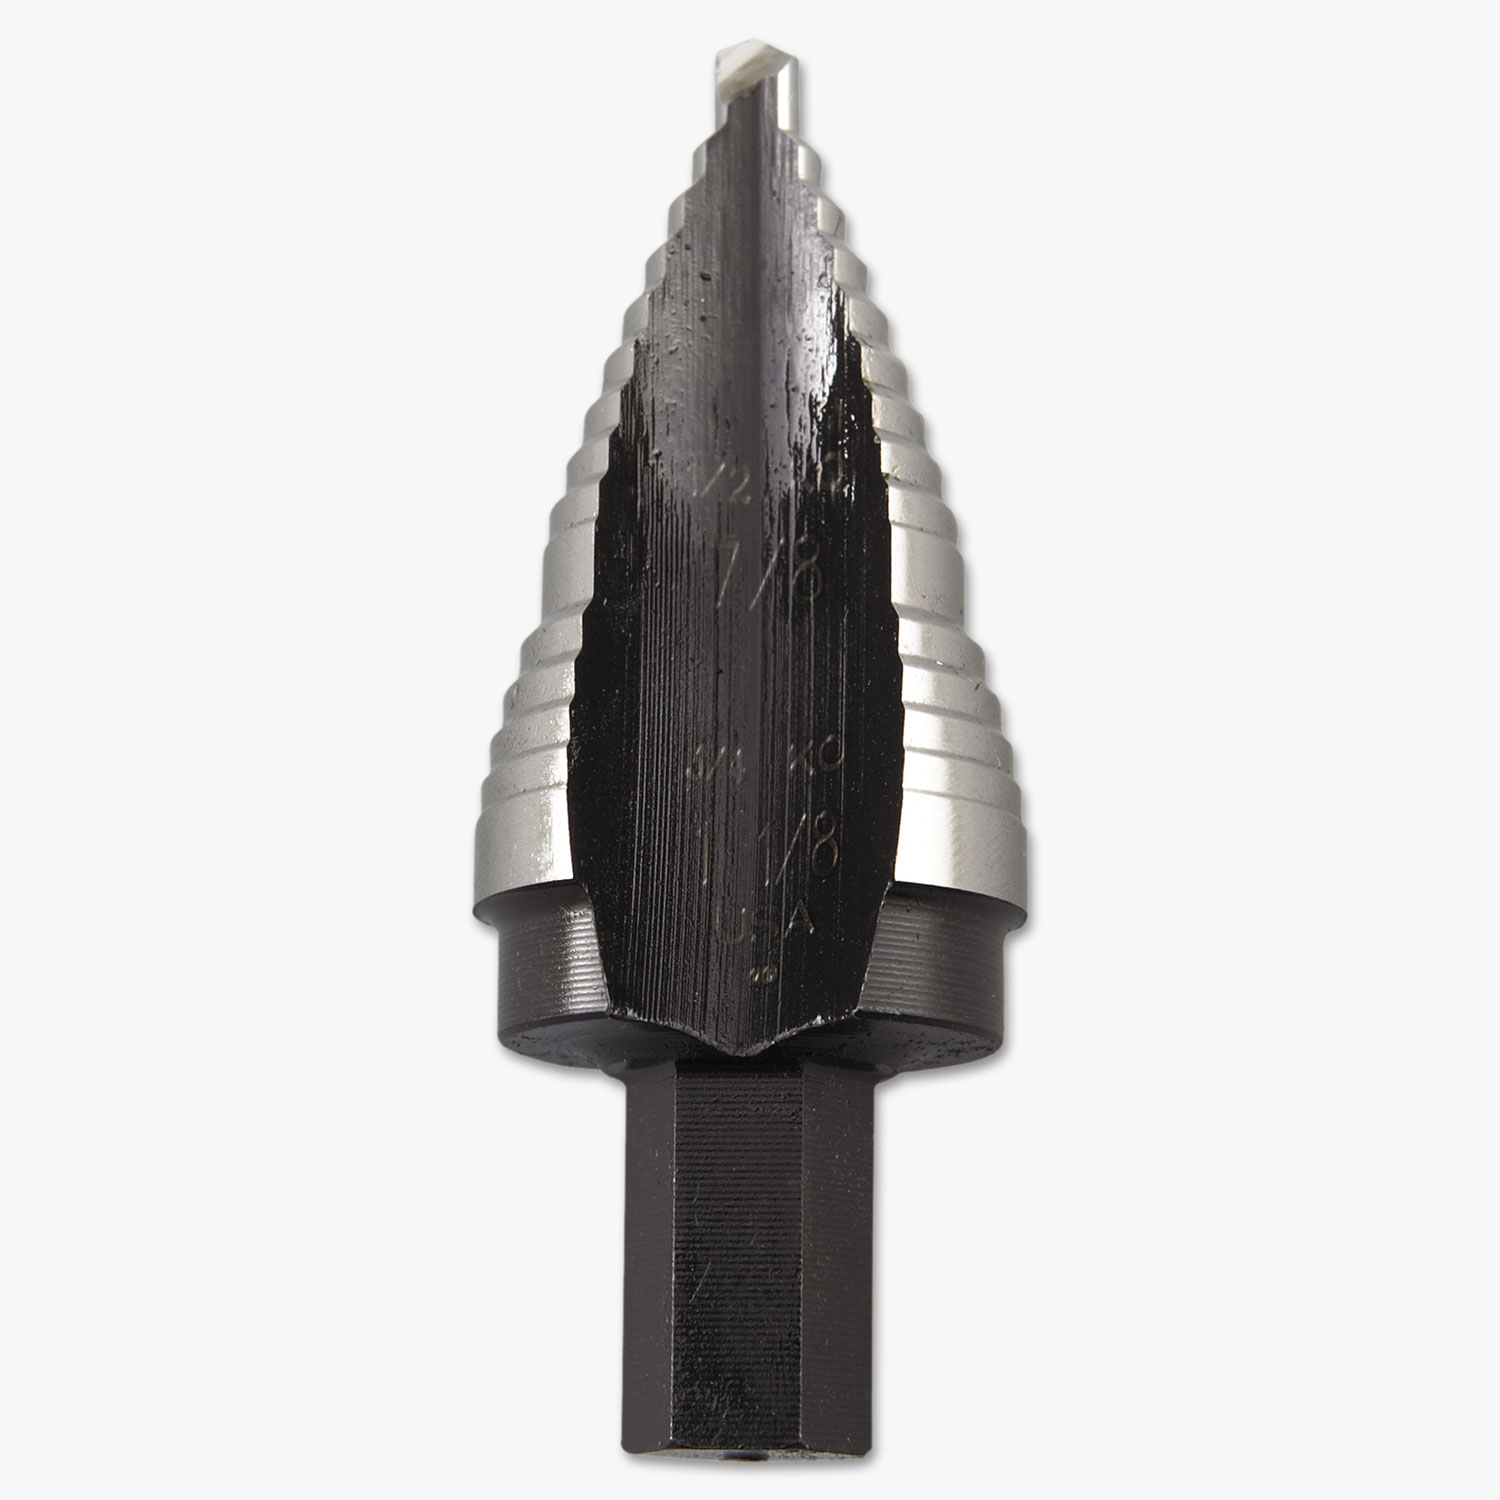  IRWIN 10239 Unibit Fractional Two-Step Drill Bit, 7/8in to 1 1/8in (UBT10239) 